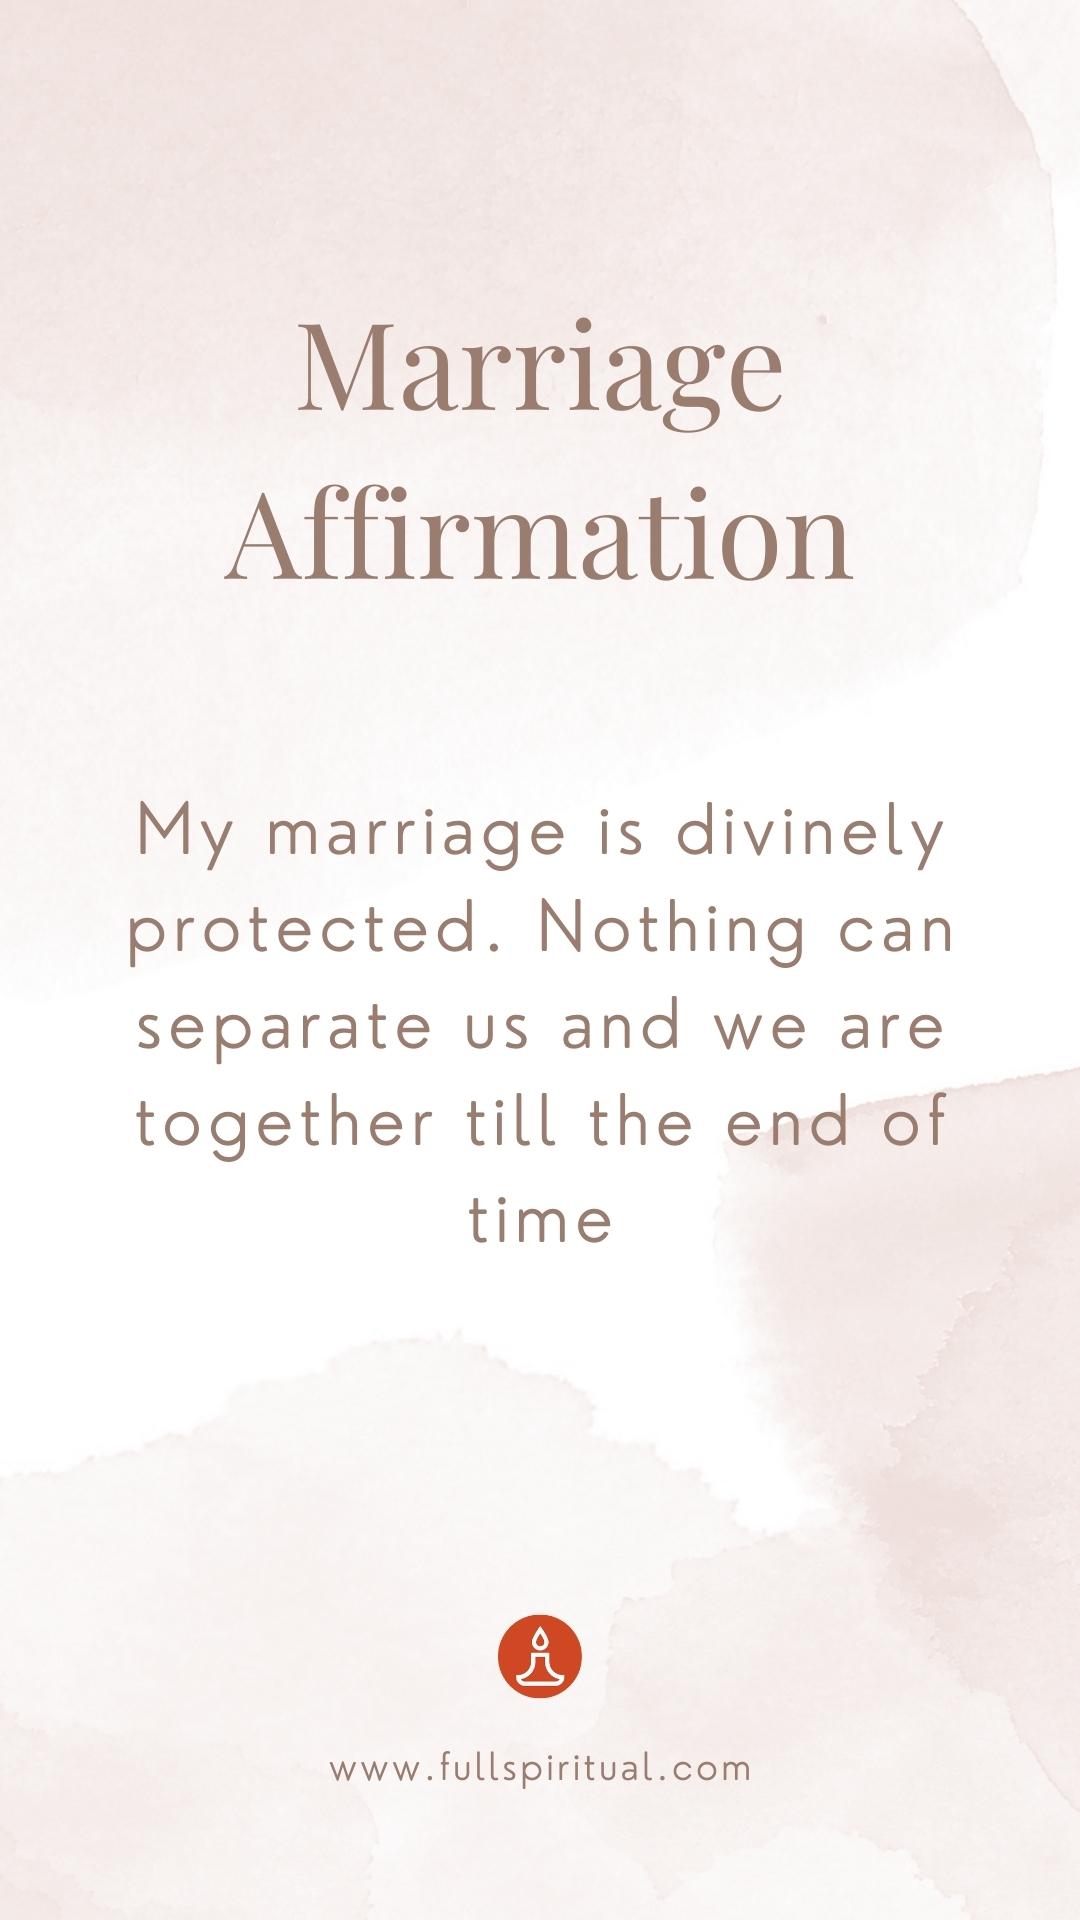 Marriage affirmation for husband and wife